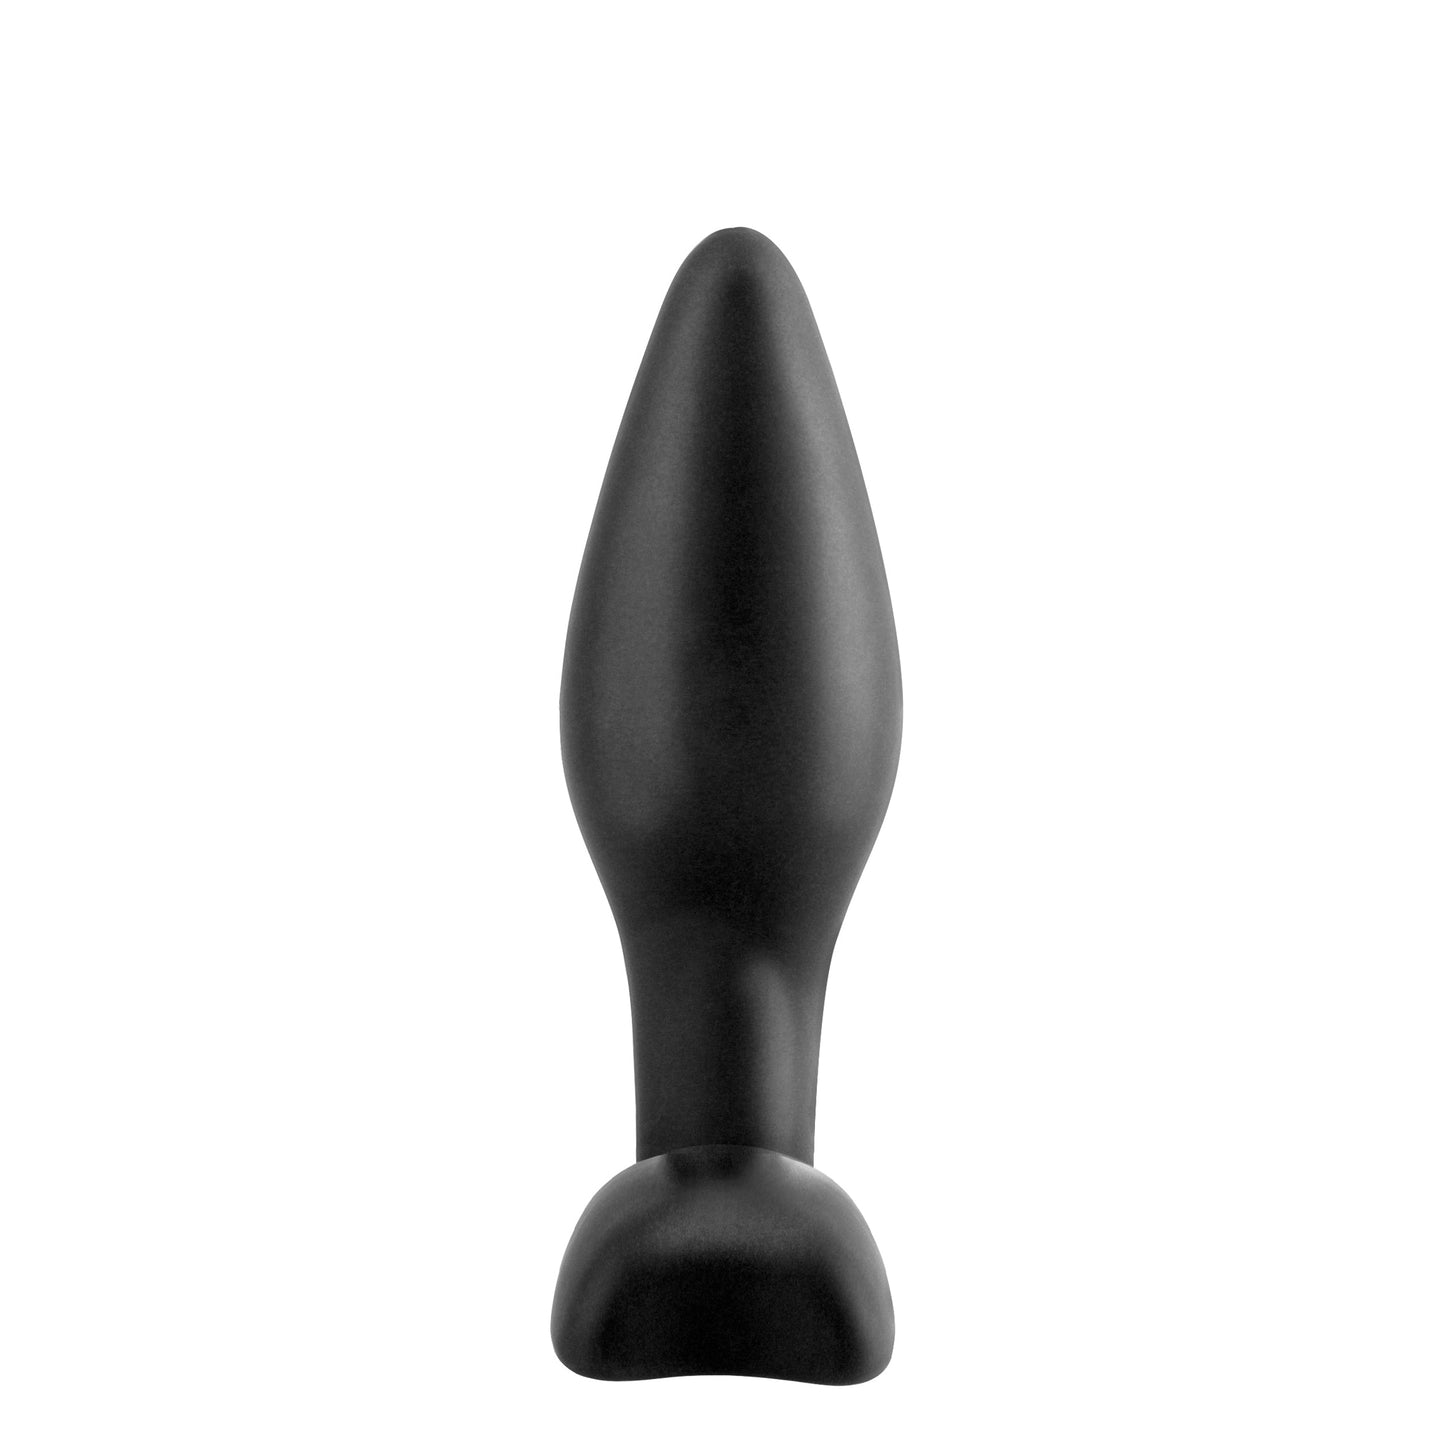 Anal Fantasy Collection Mini Silicone Plug - Black - Thorn & Feather Sex Toy Canada